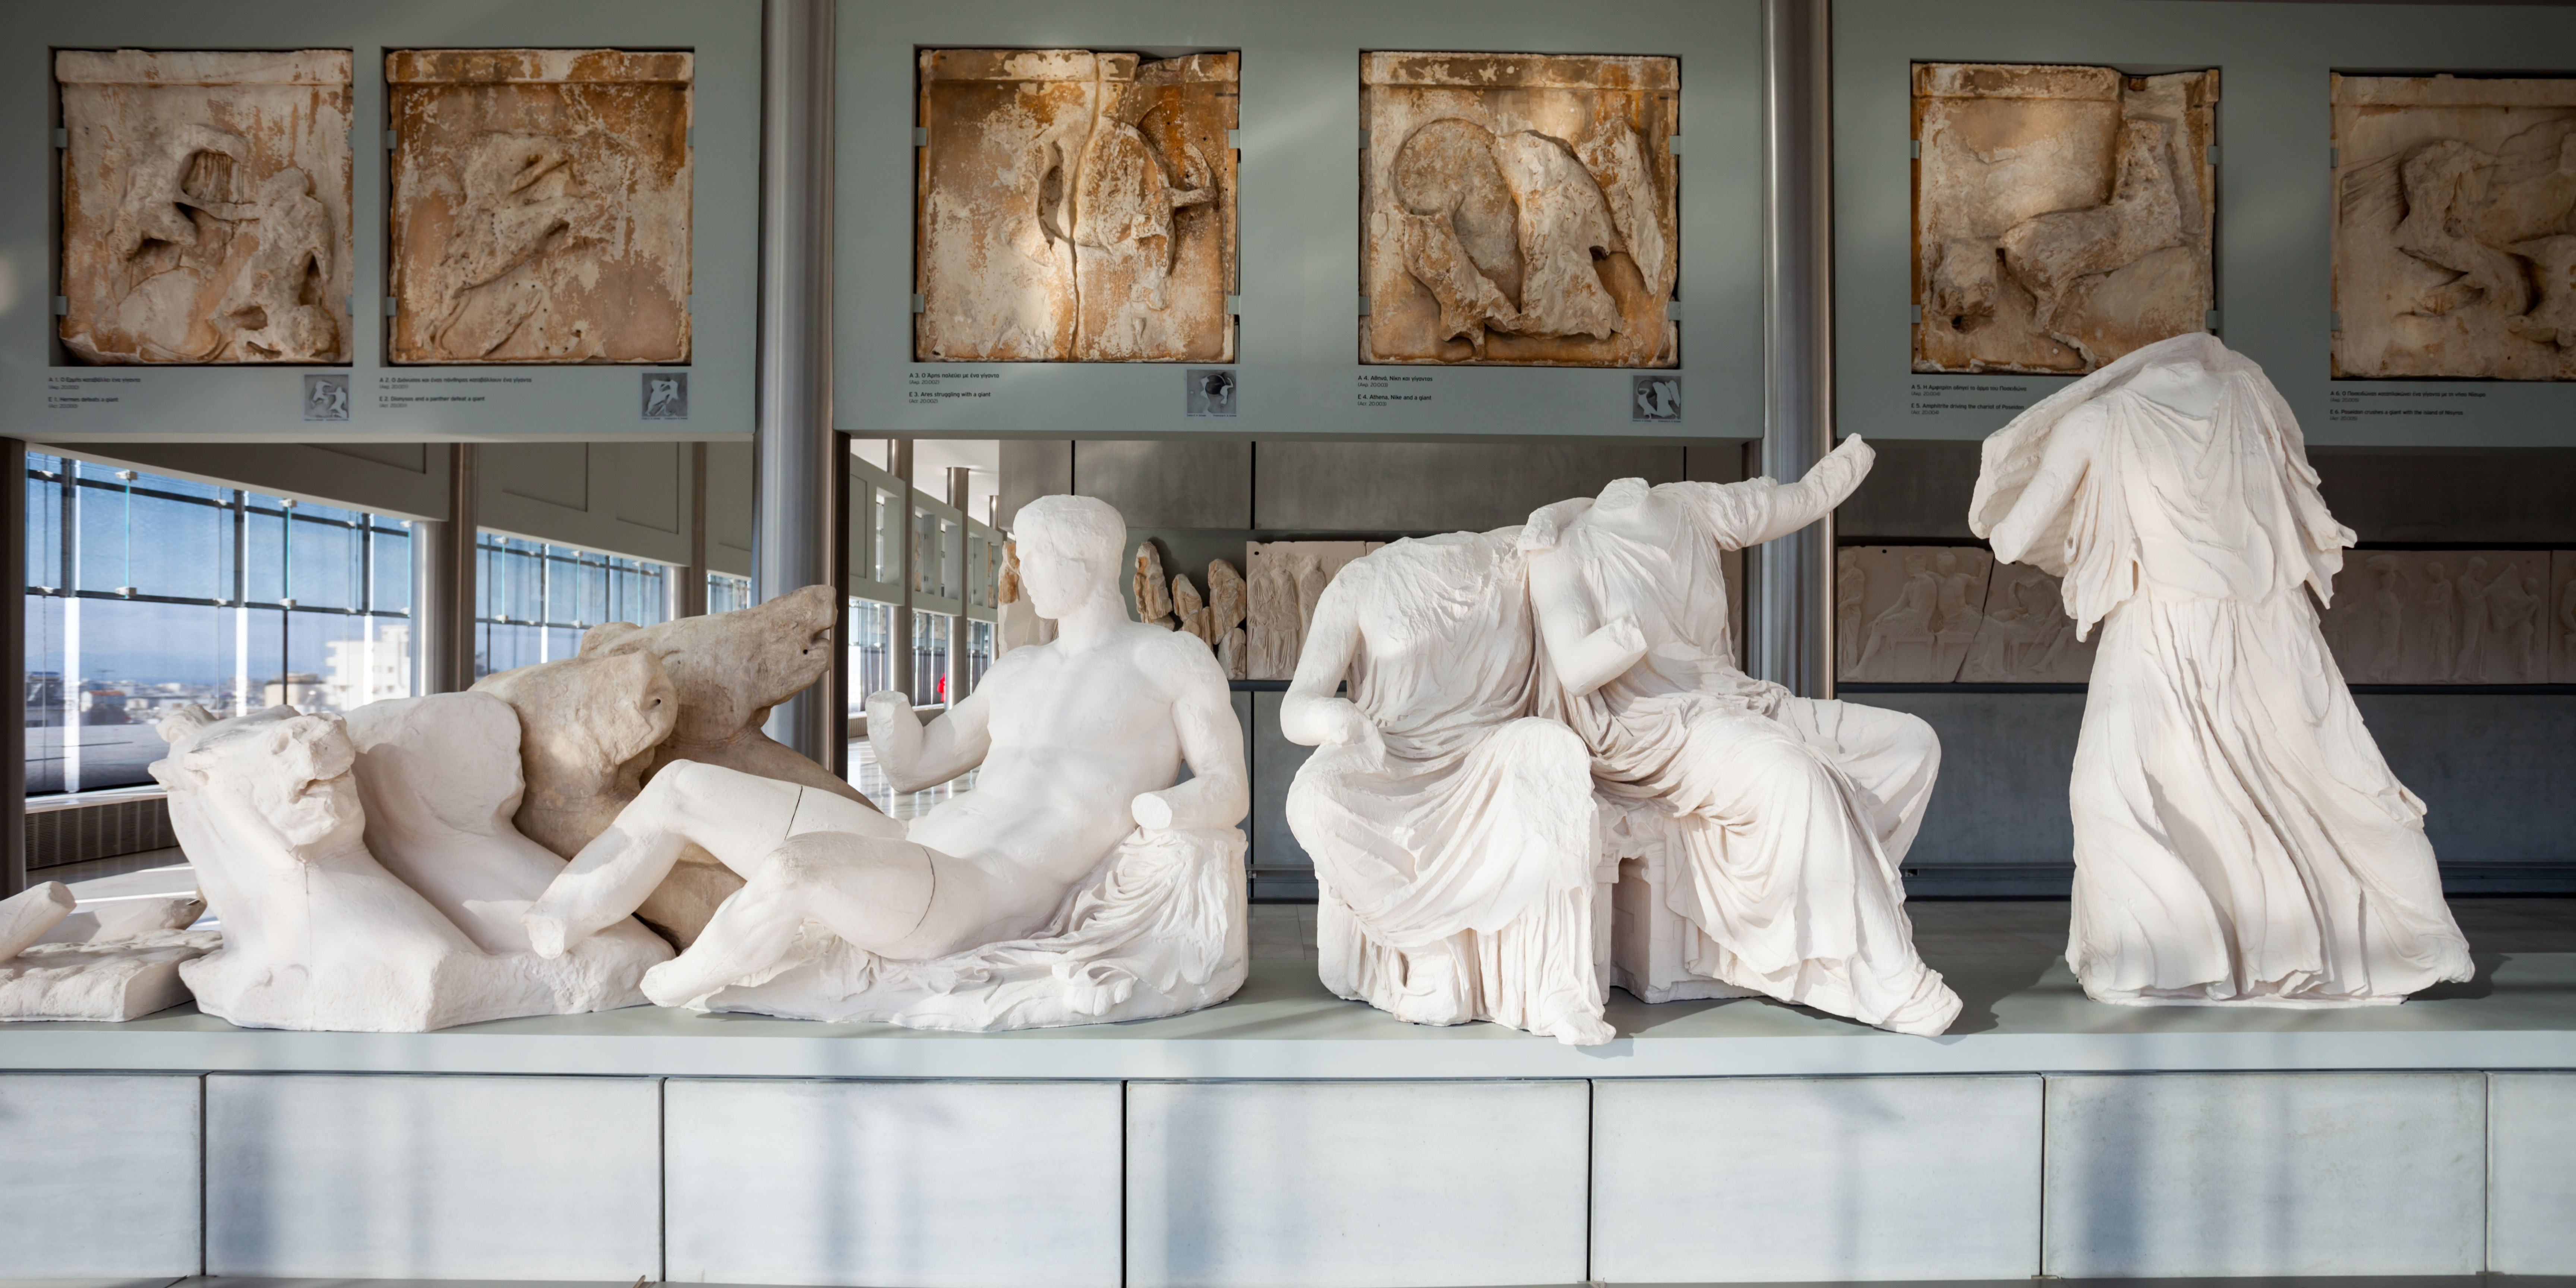 Sculptures and friezes on display in a museum with large windows in the background.